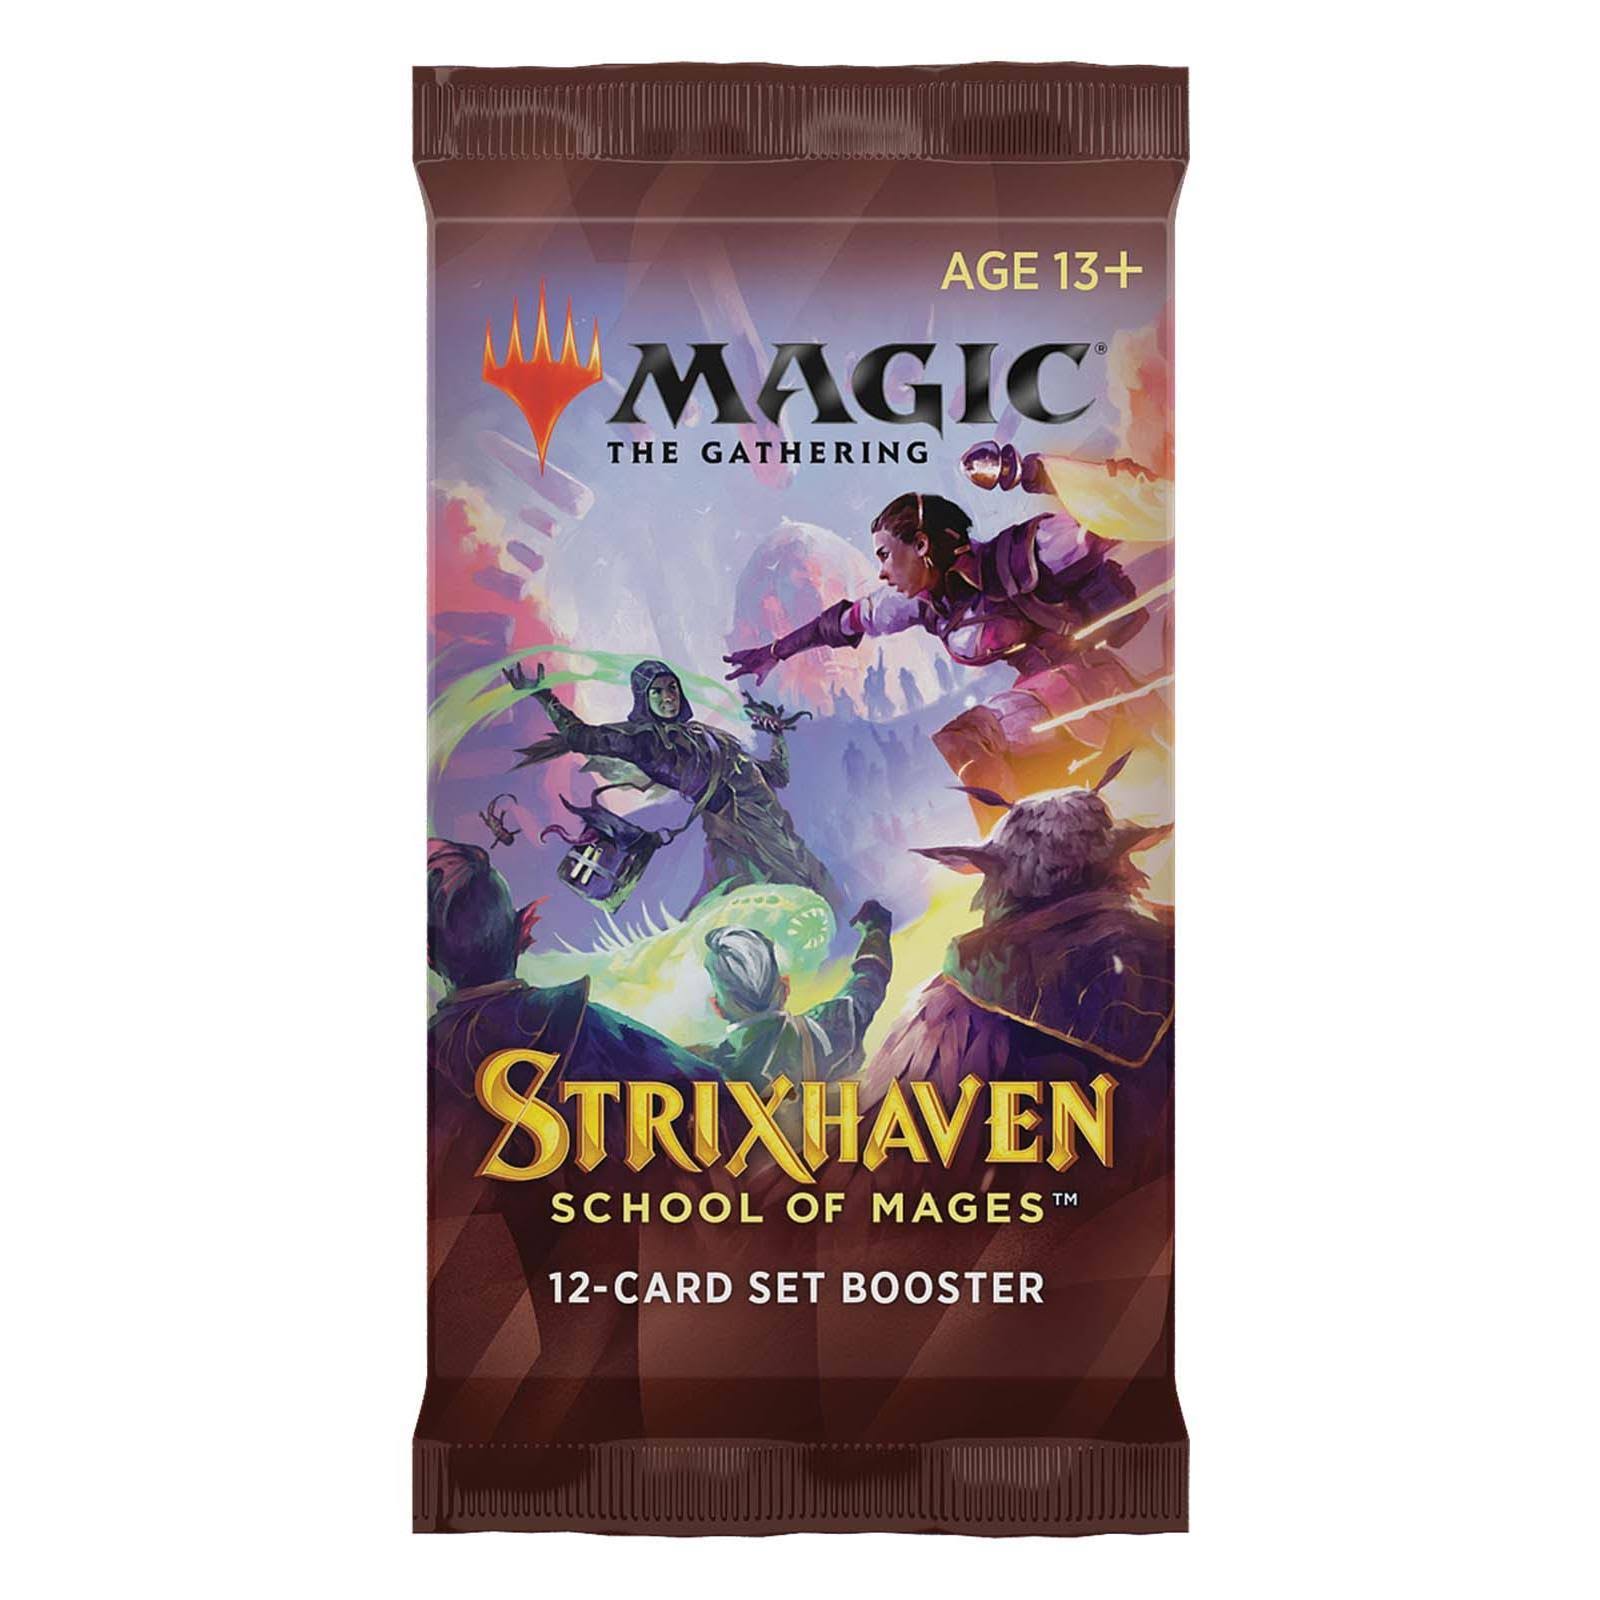 Magic The Gathering Strixhaven School of Mages Set Booster Pack